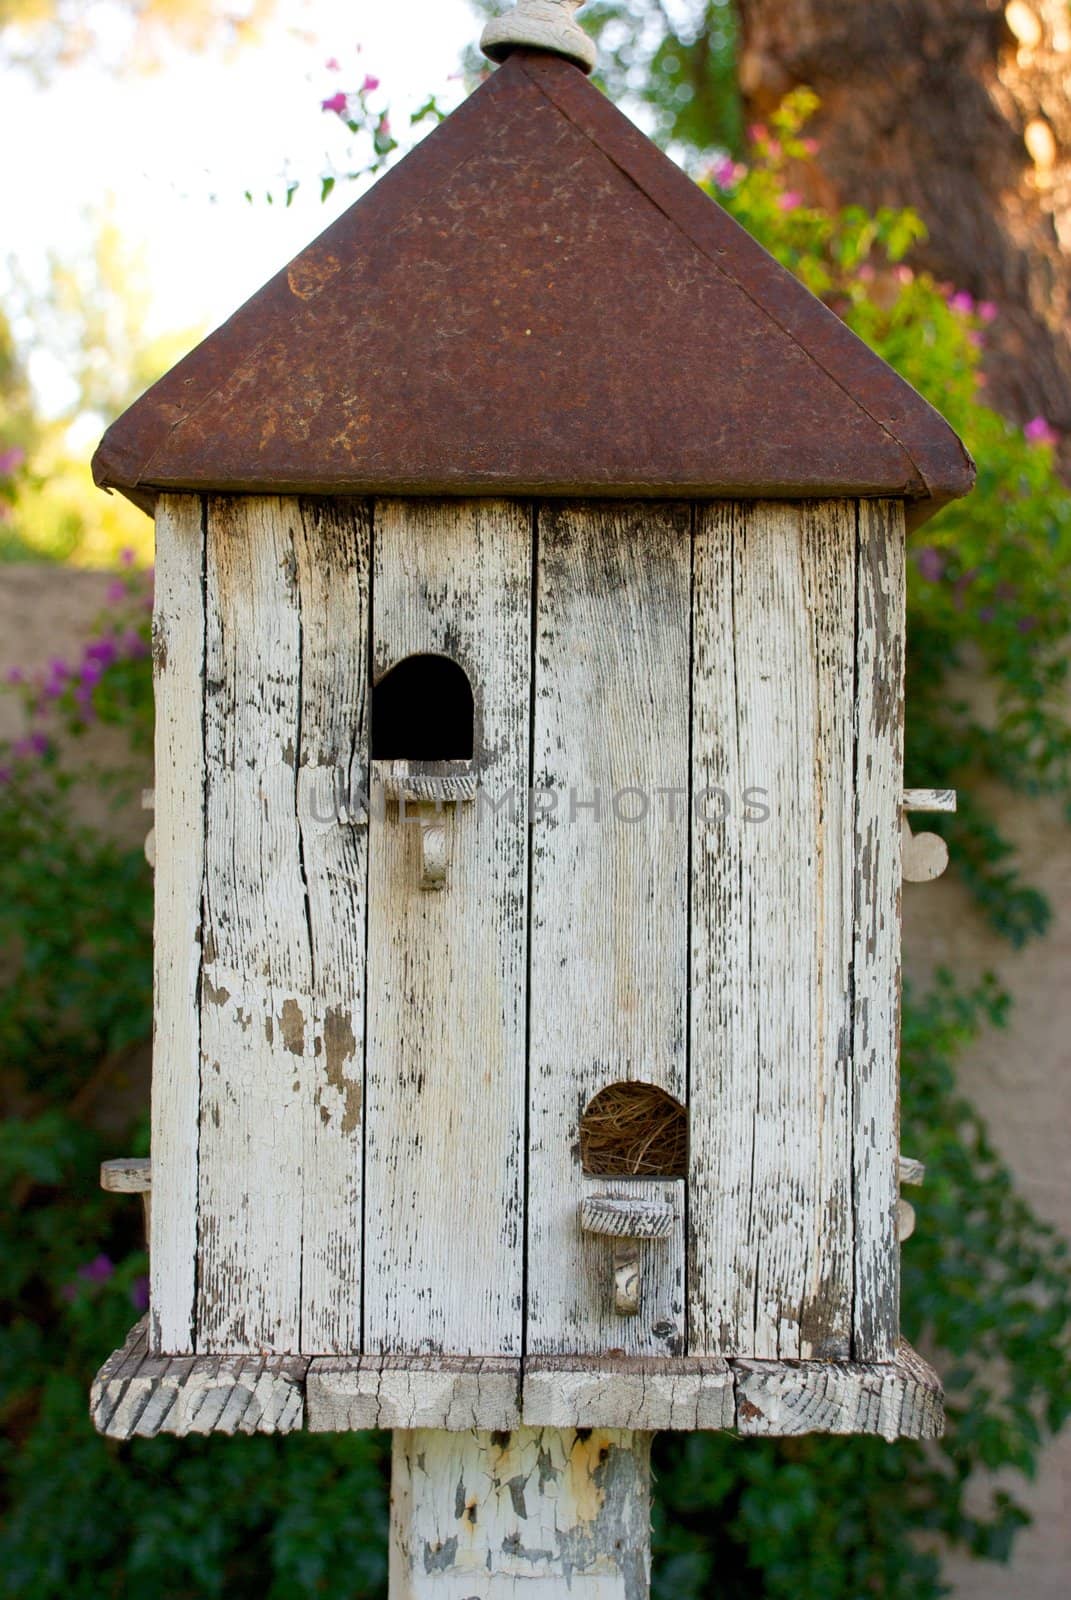 White Birdhouse with Rusted Roof by pixelsnap